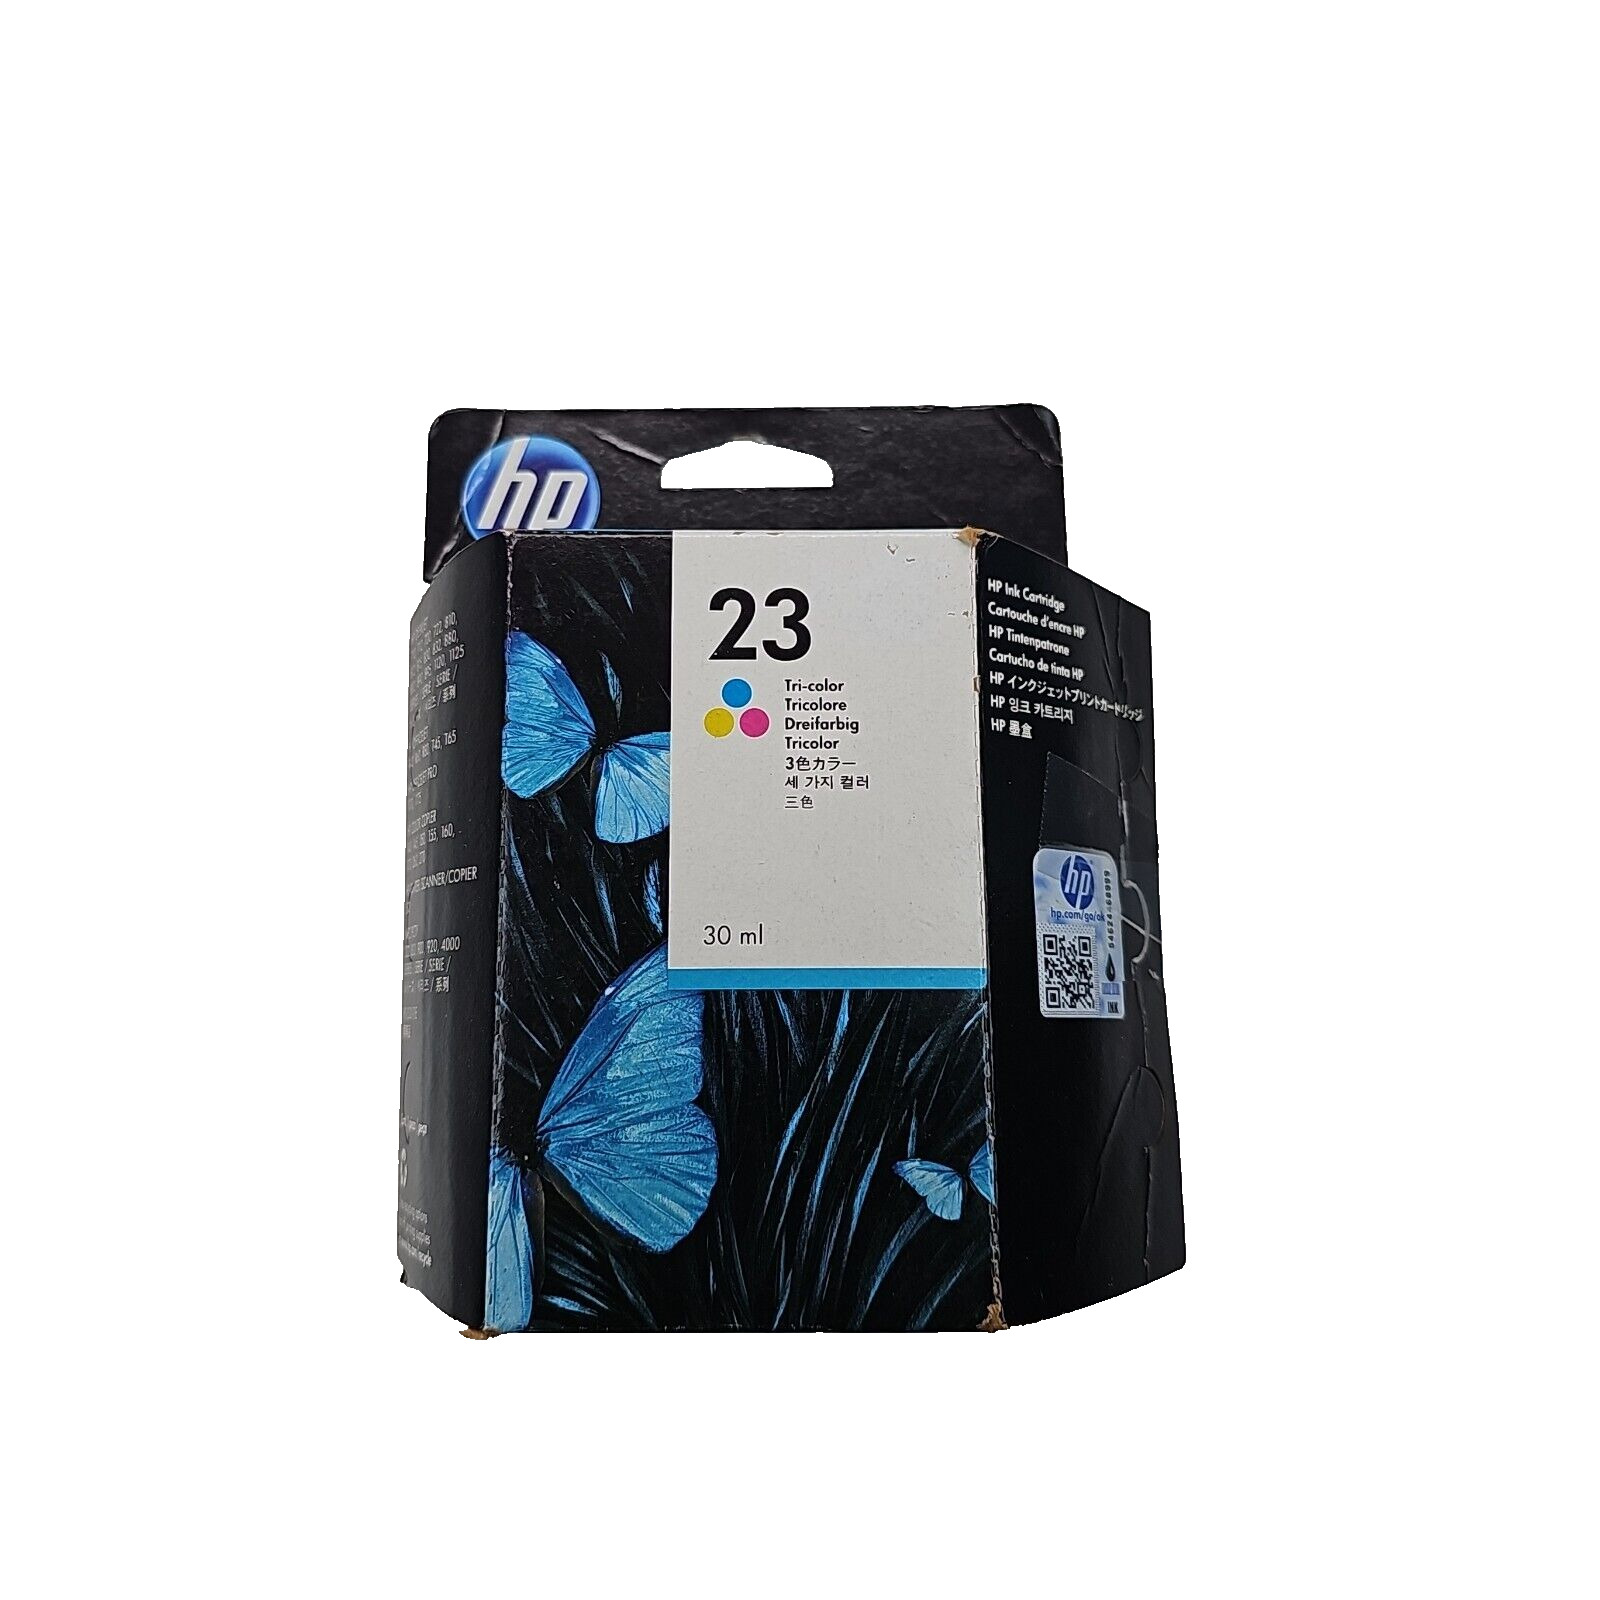 HP 23 Ink Cartridge GENUINE HP Tri-Color New Sealed Expiration 5/2020